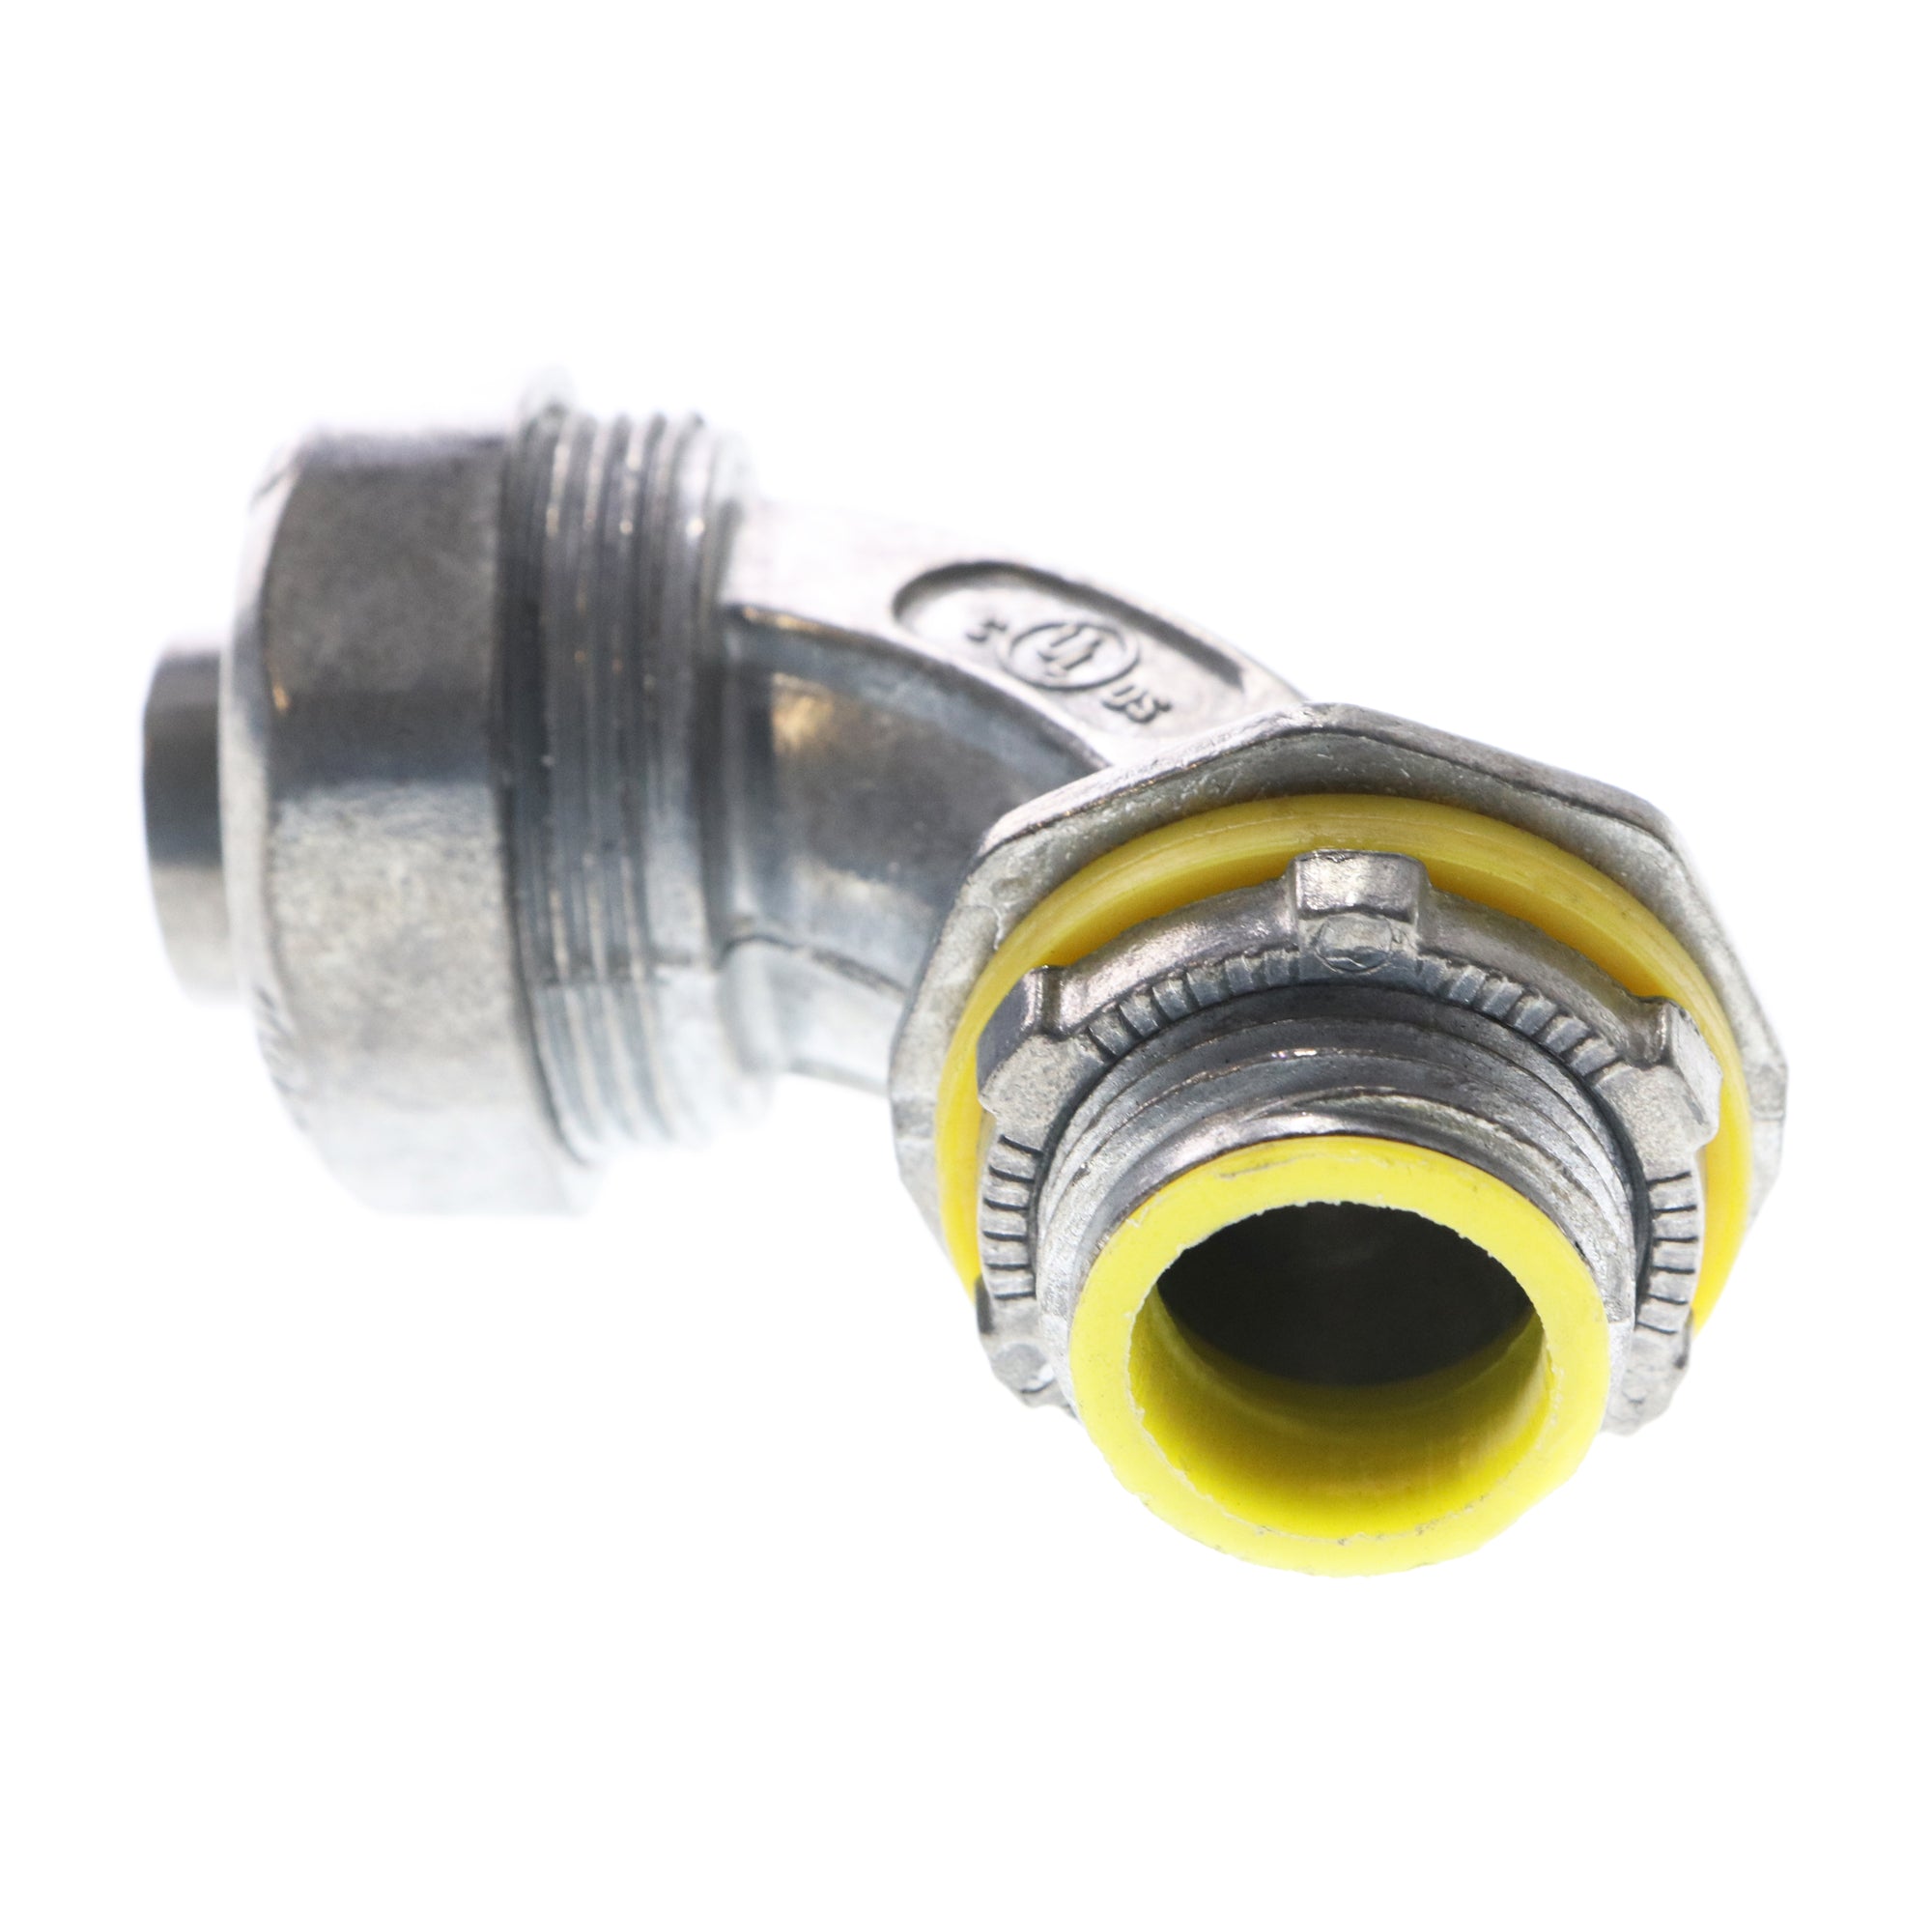 Crouse Hinds, CROUSE-HINDS LTB5090DC INSULATED LT LIQUID-TIGHT CONNECTOR, 1/2", 90°, (15-PACK)